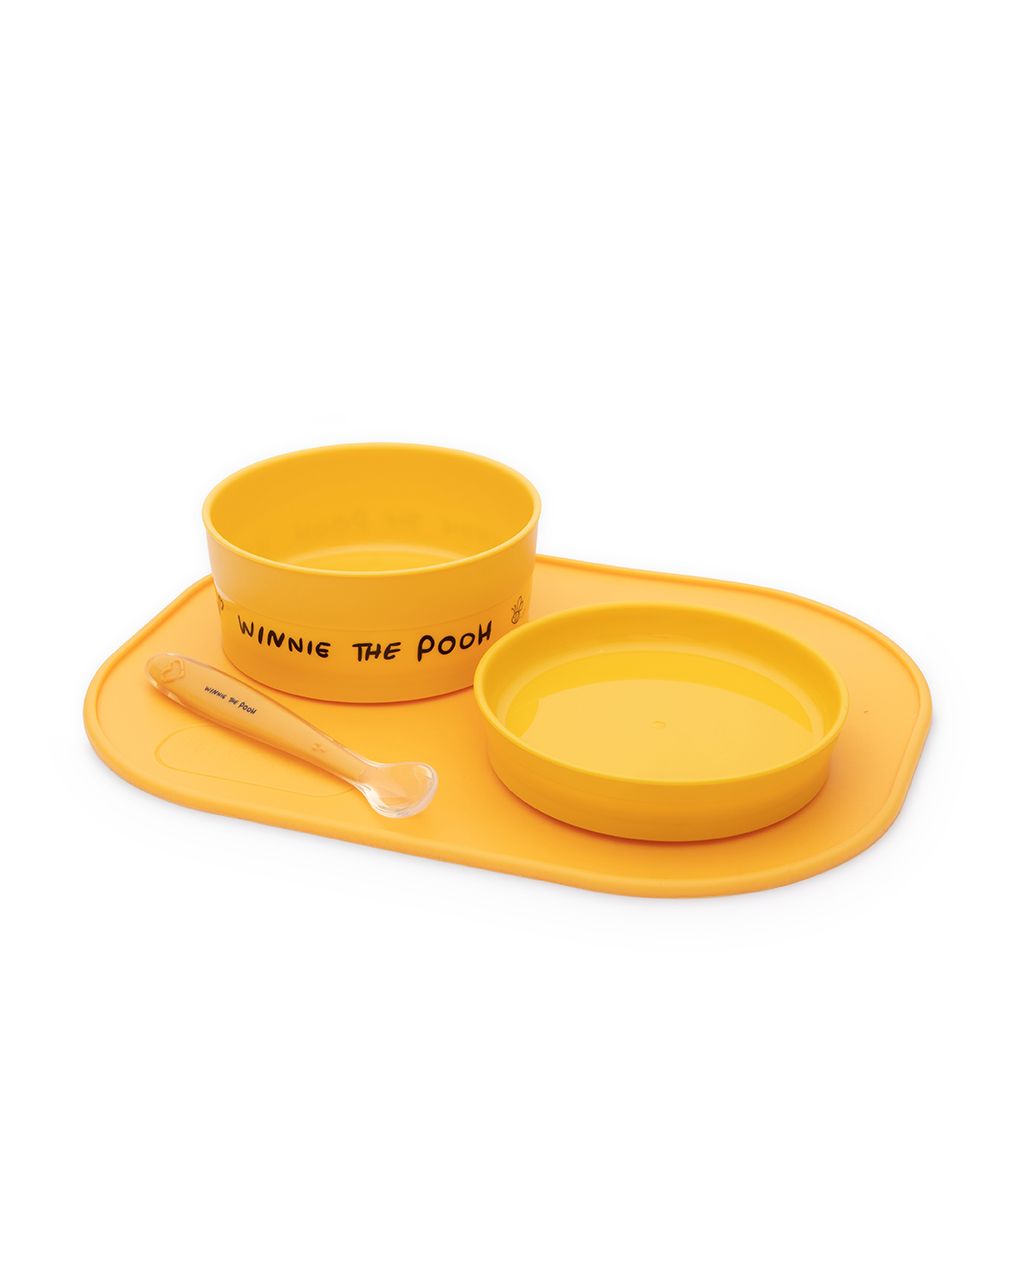 Set pappa basic in silicone winnie the pooh -that's love